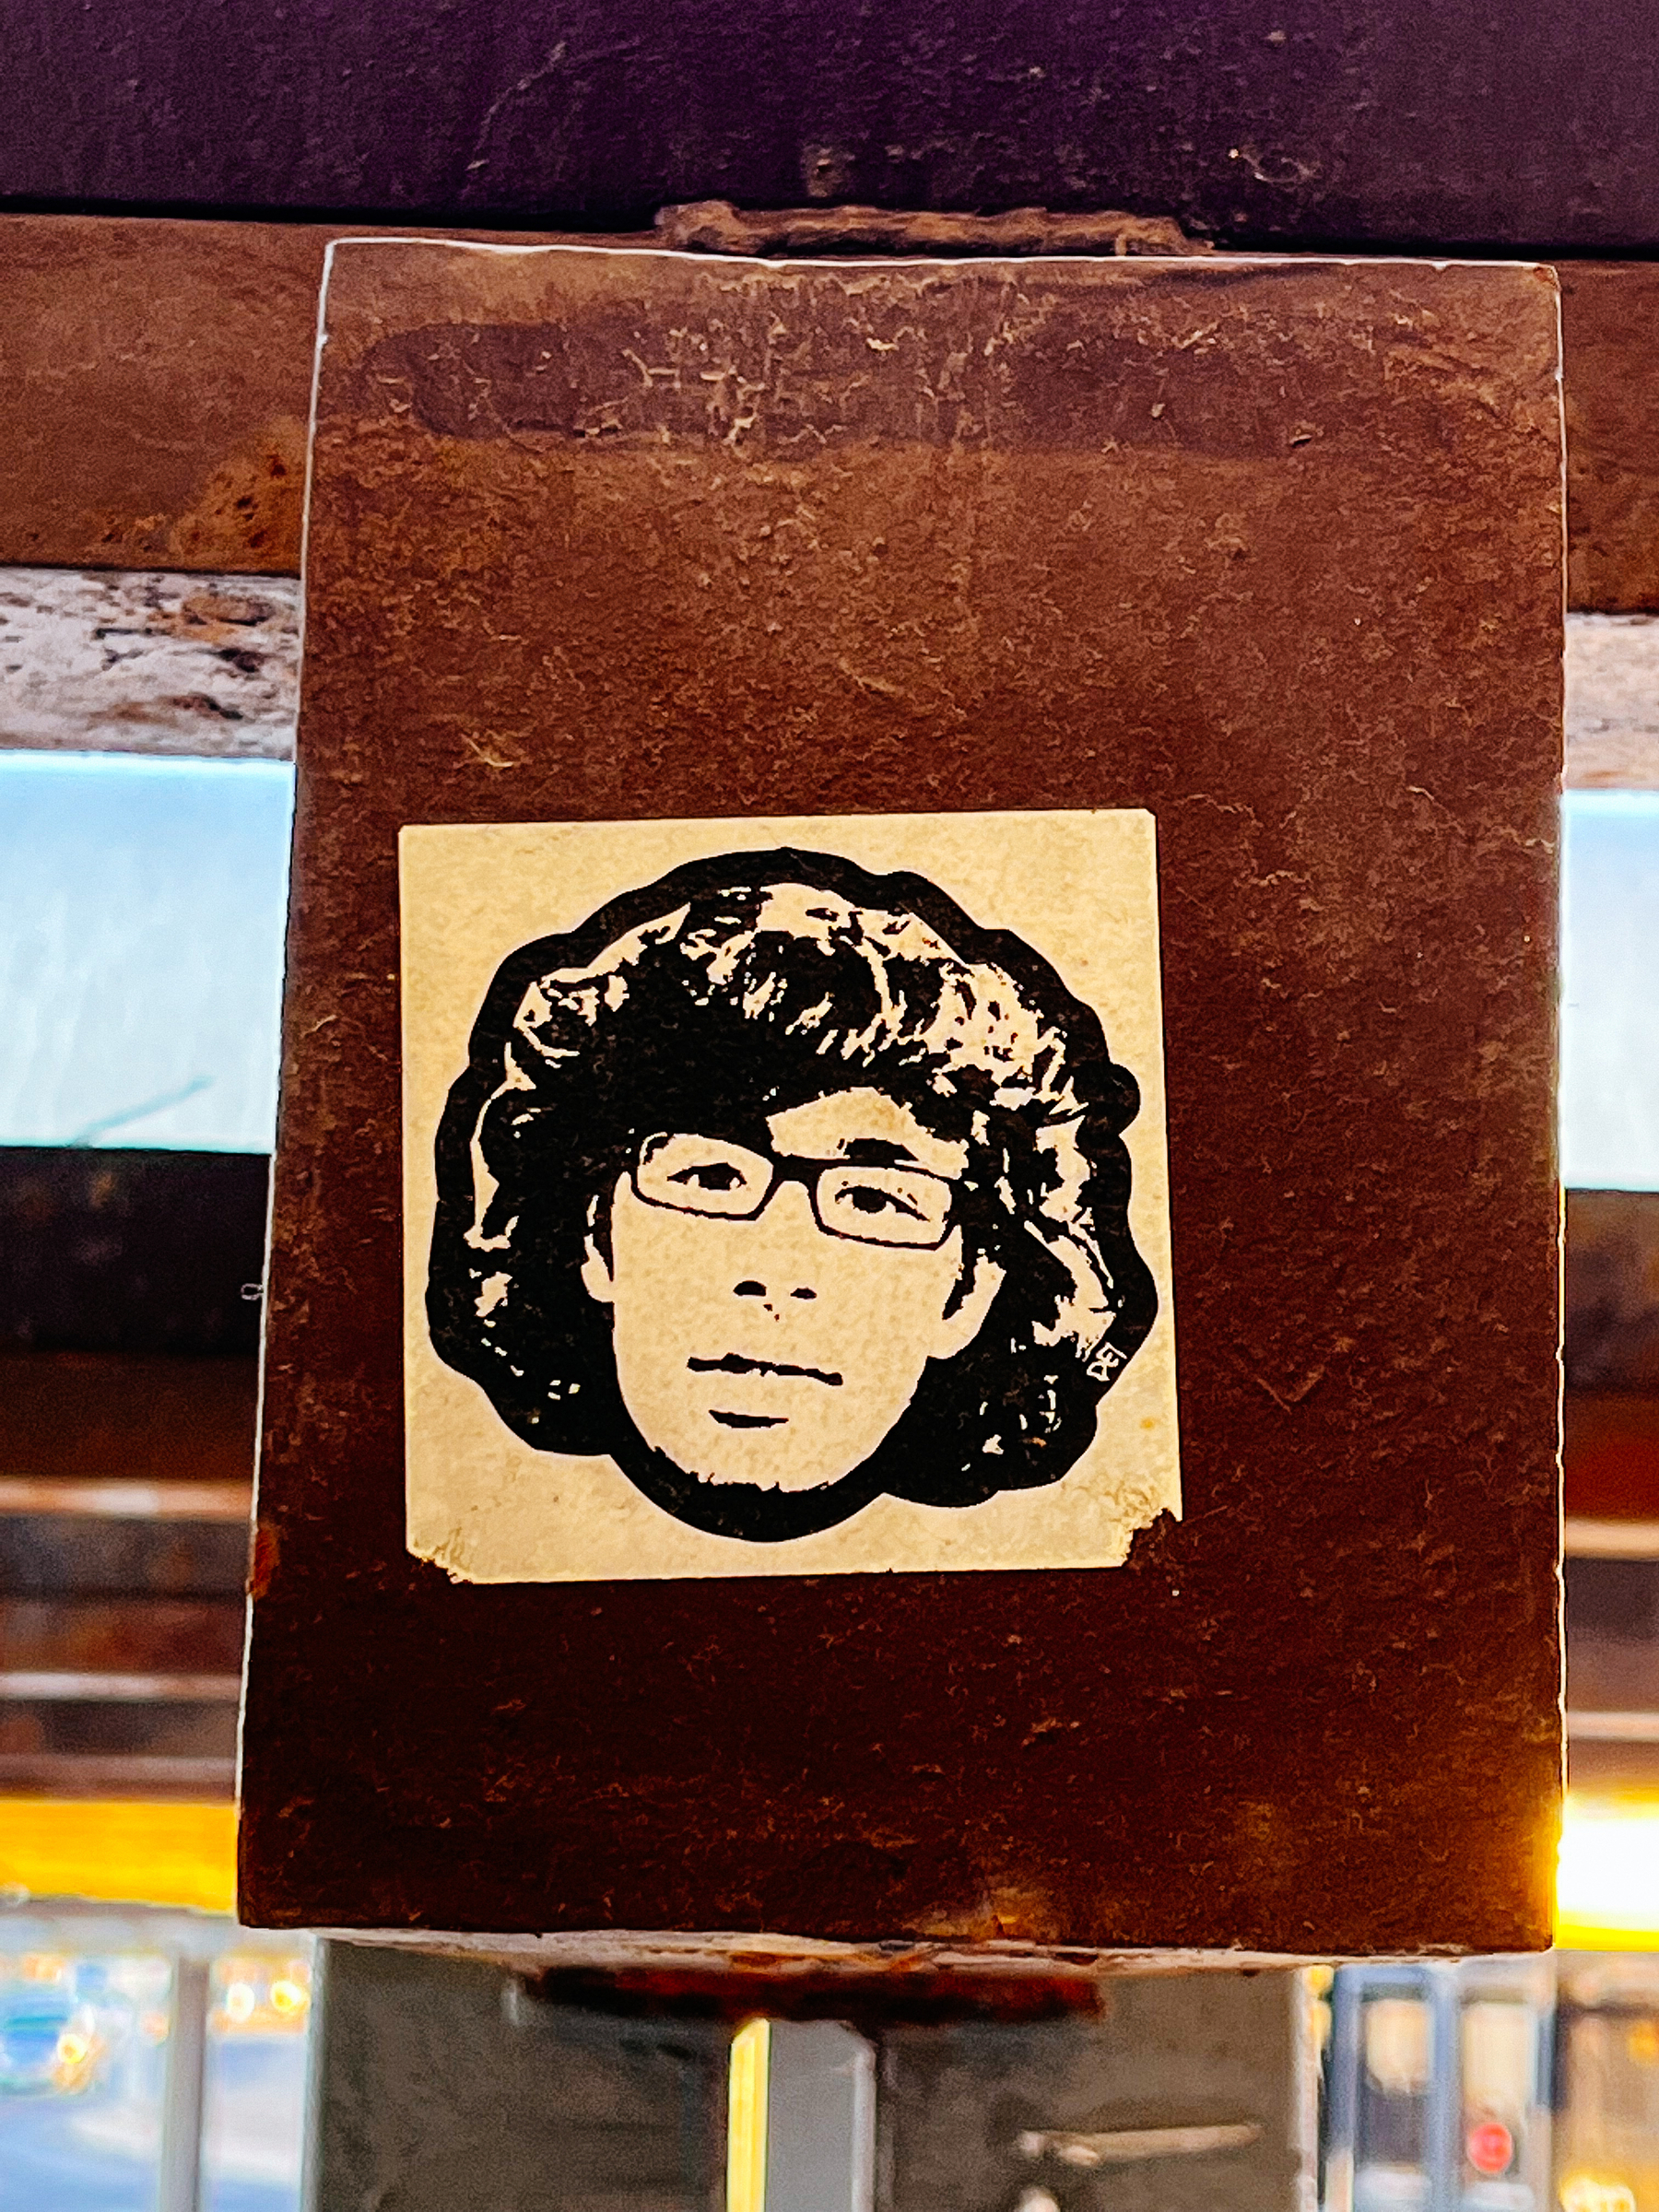 Sticker of a drawing of a man’s face. He has glasses and bushy hair. 